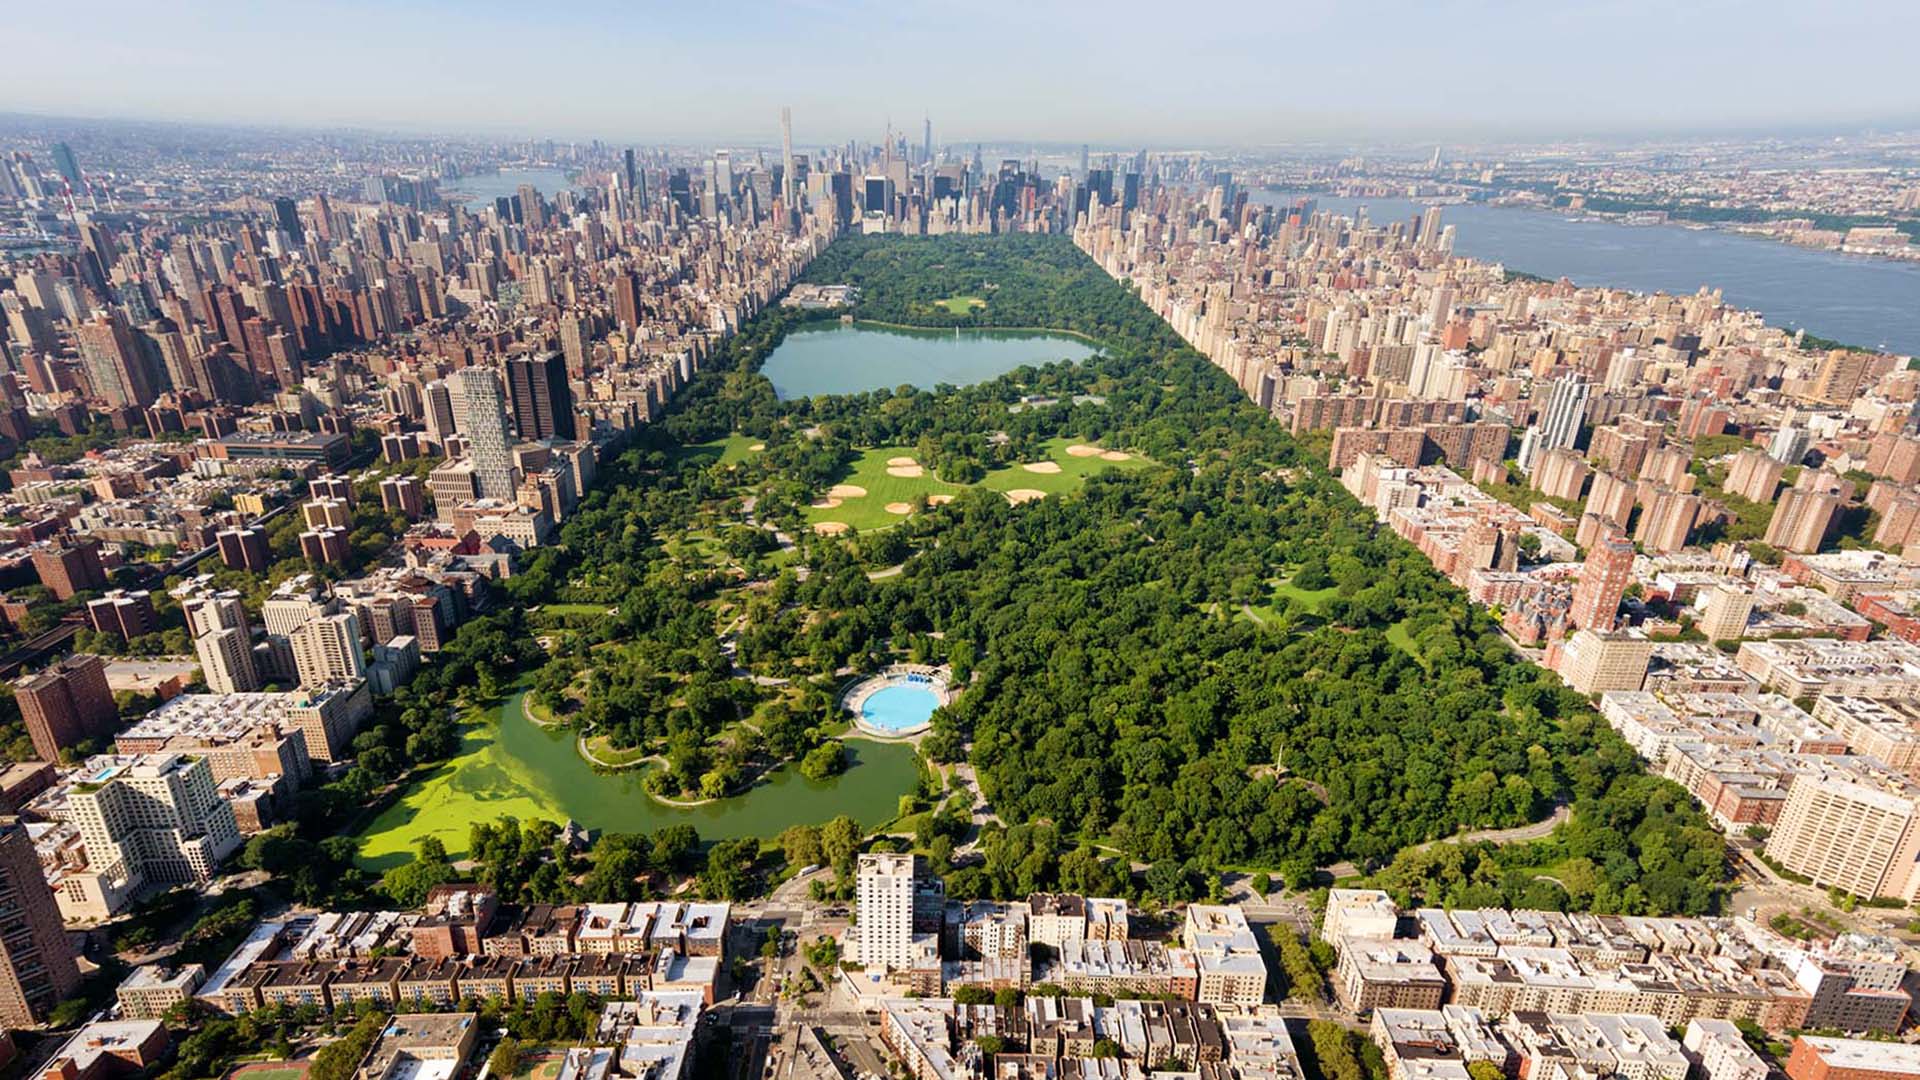 Central Park in New York City